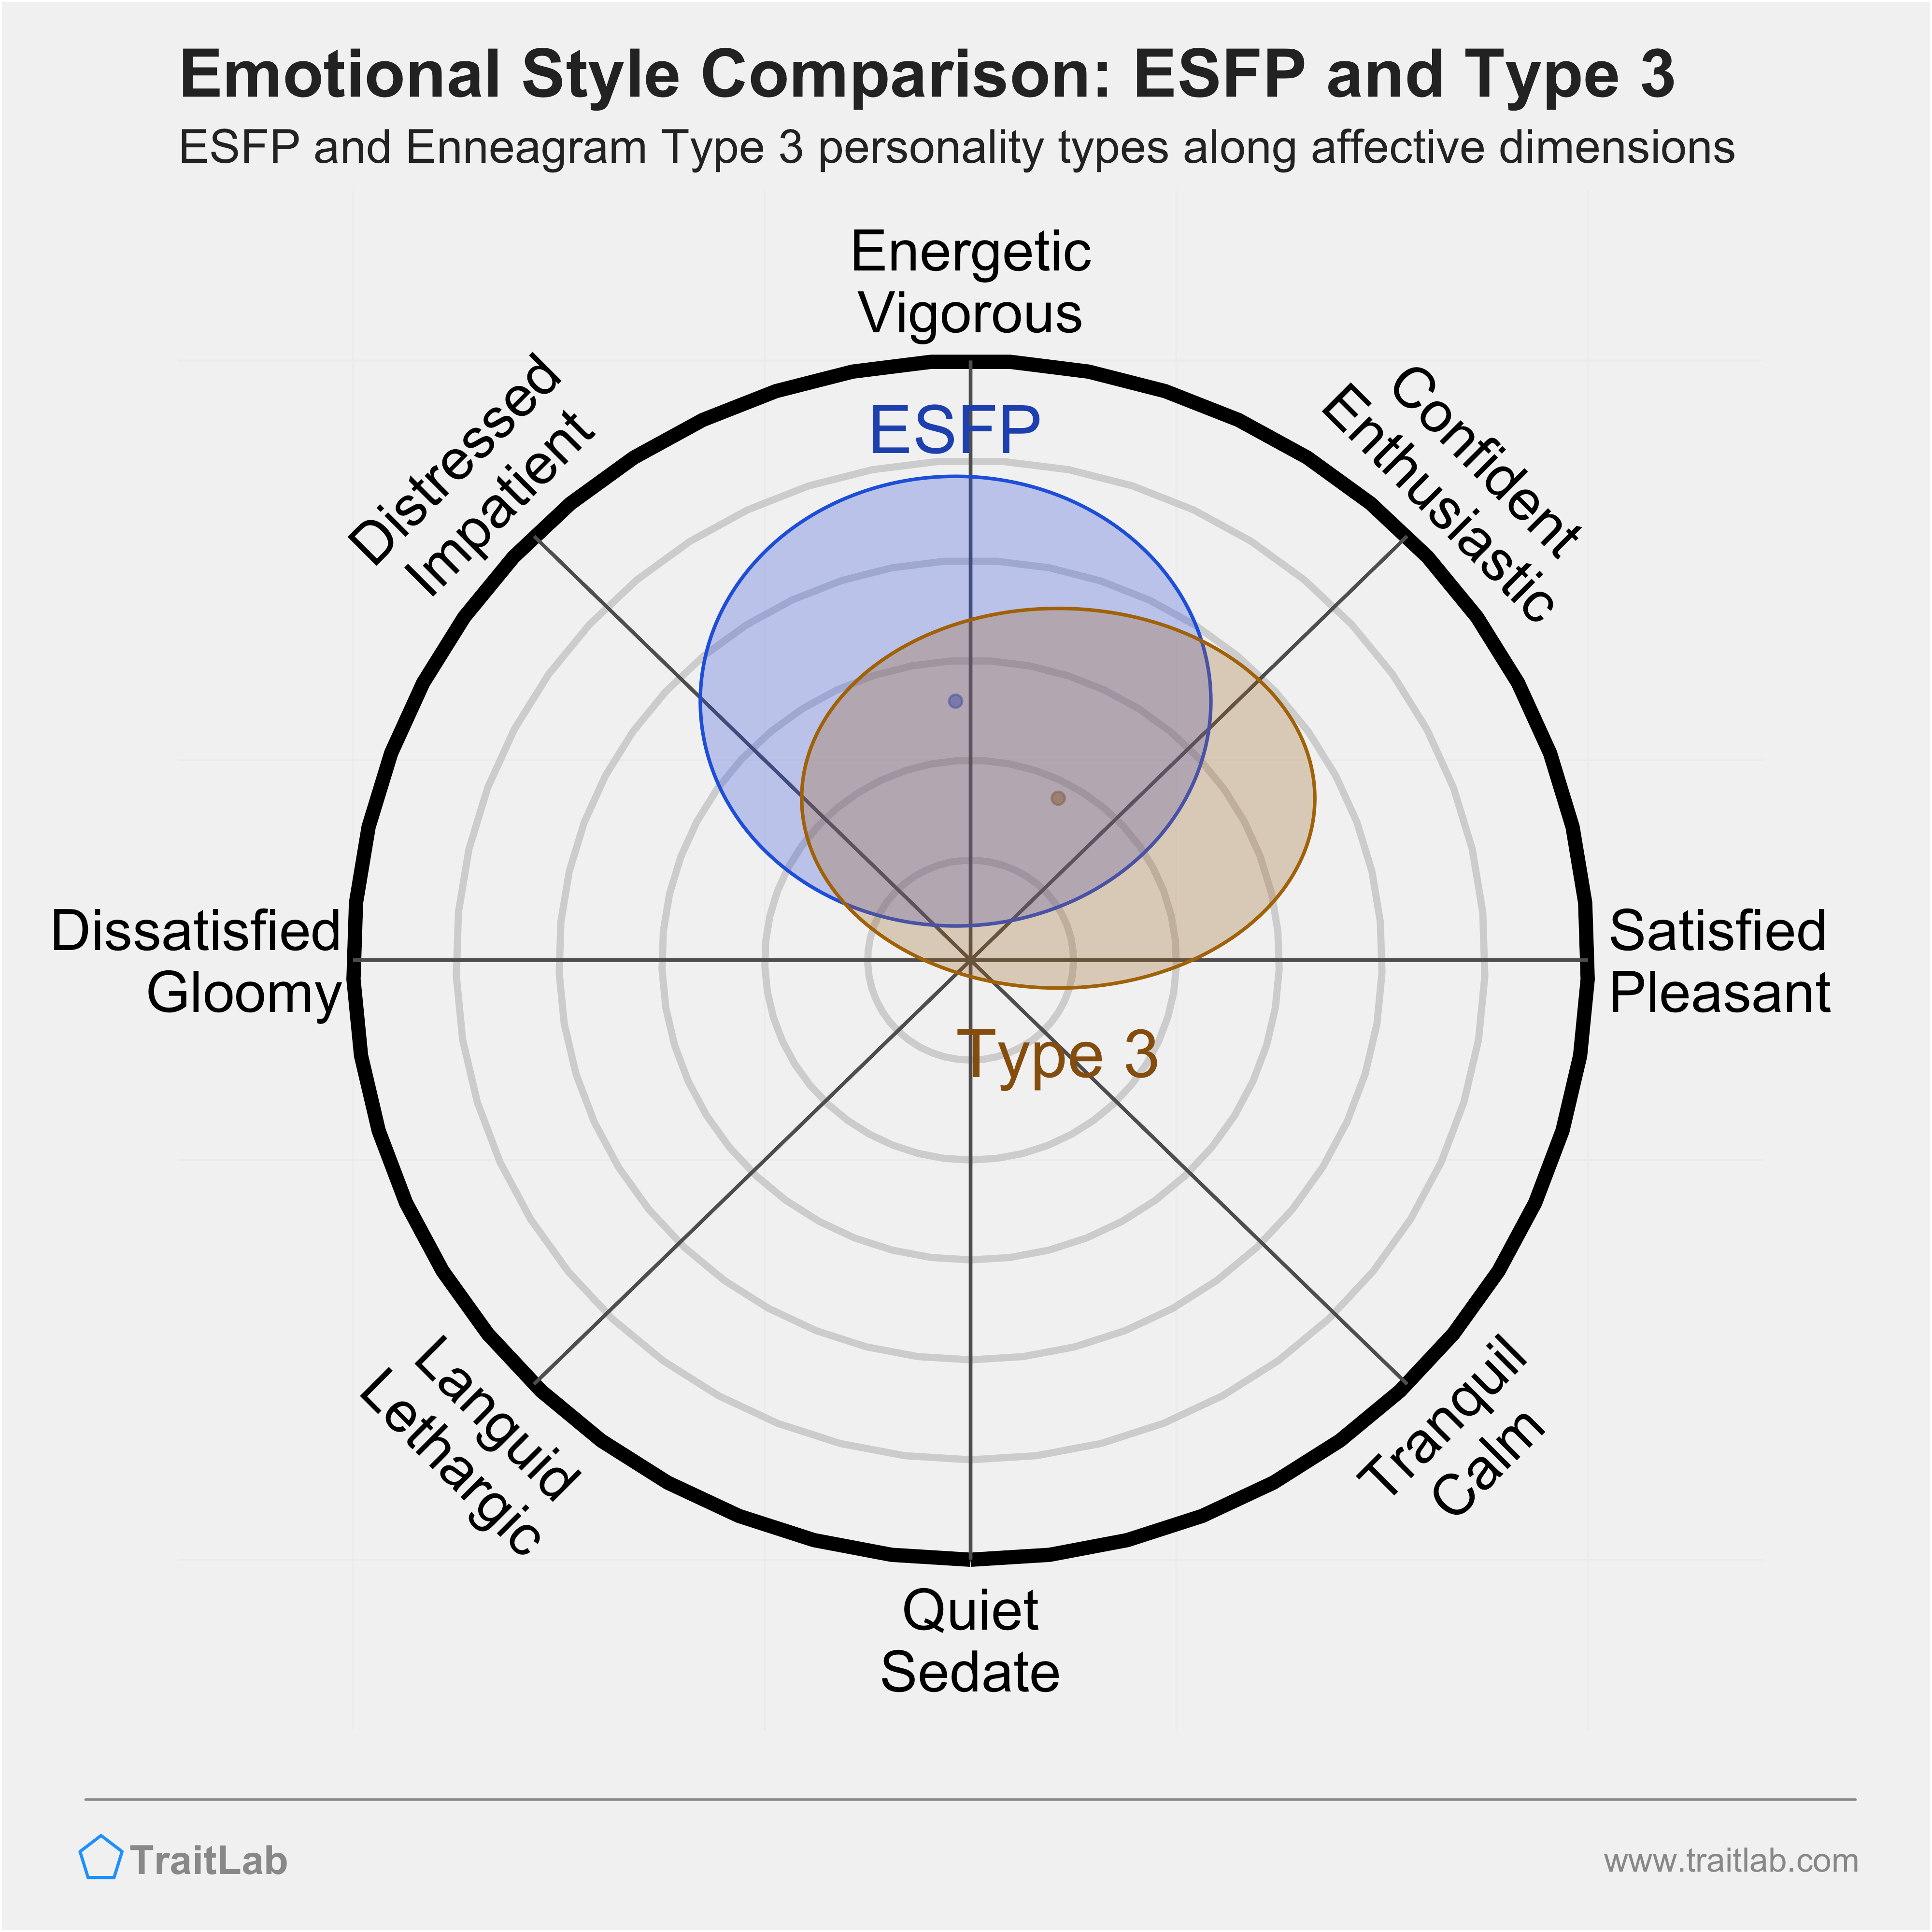 ESFP and Type 3 comparison across emotional (affective) dimensions